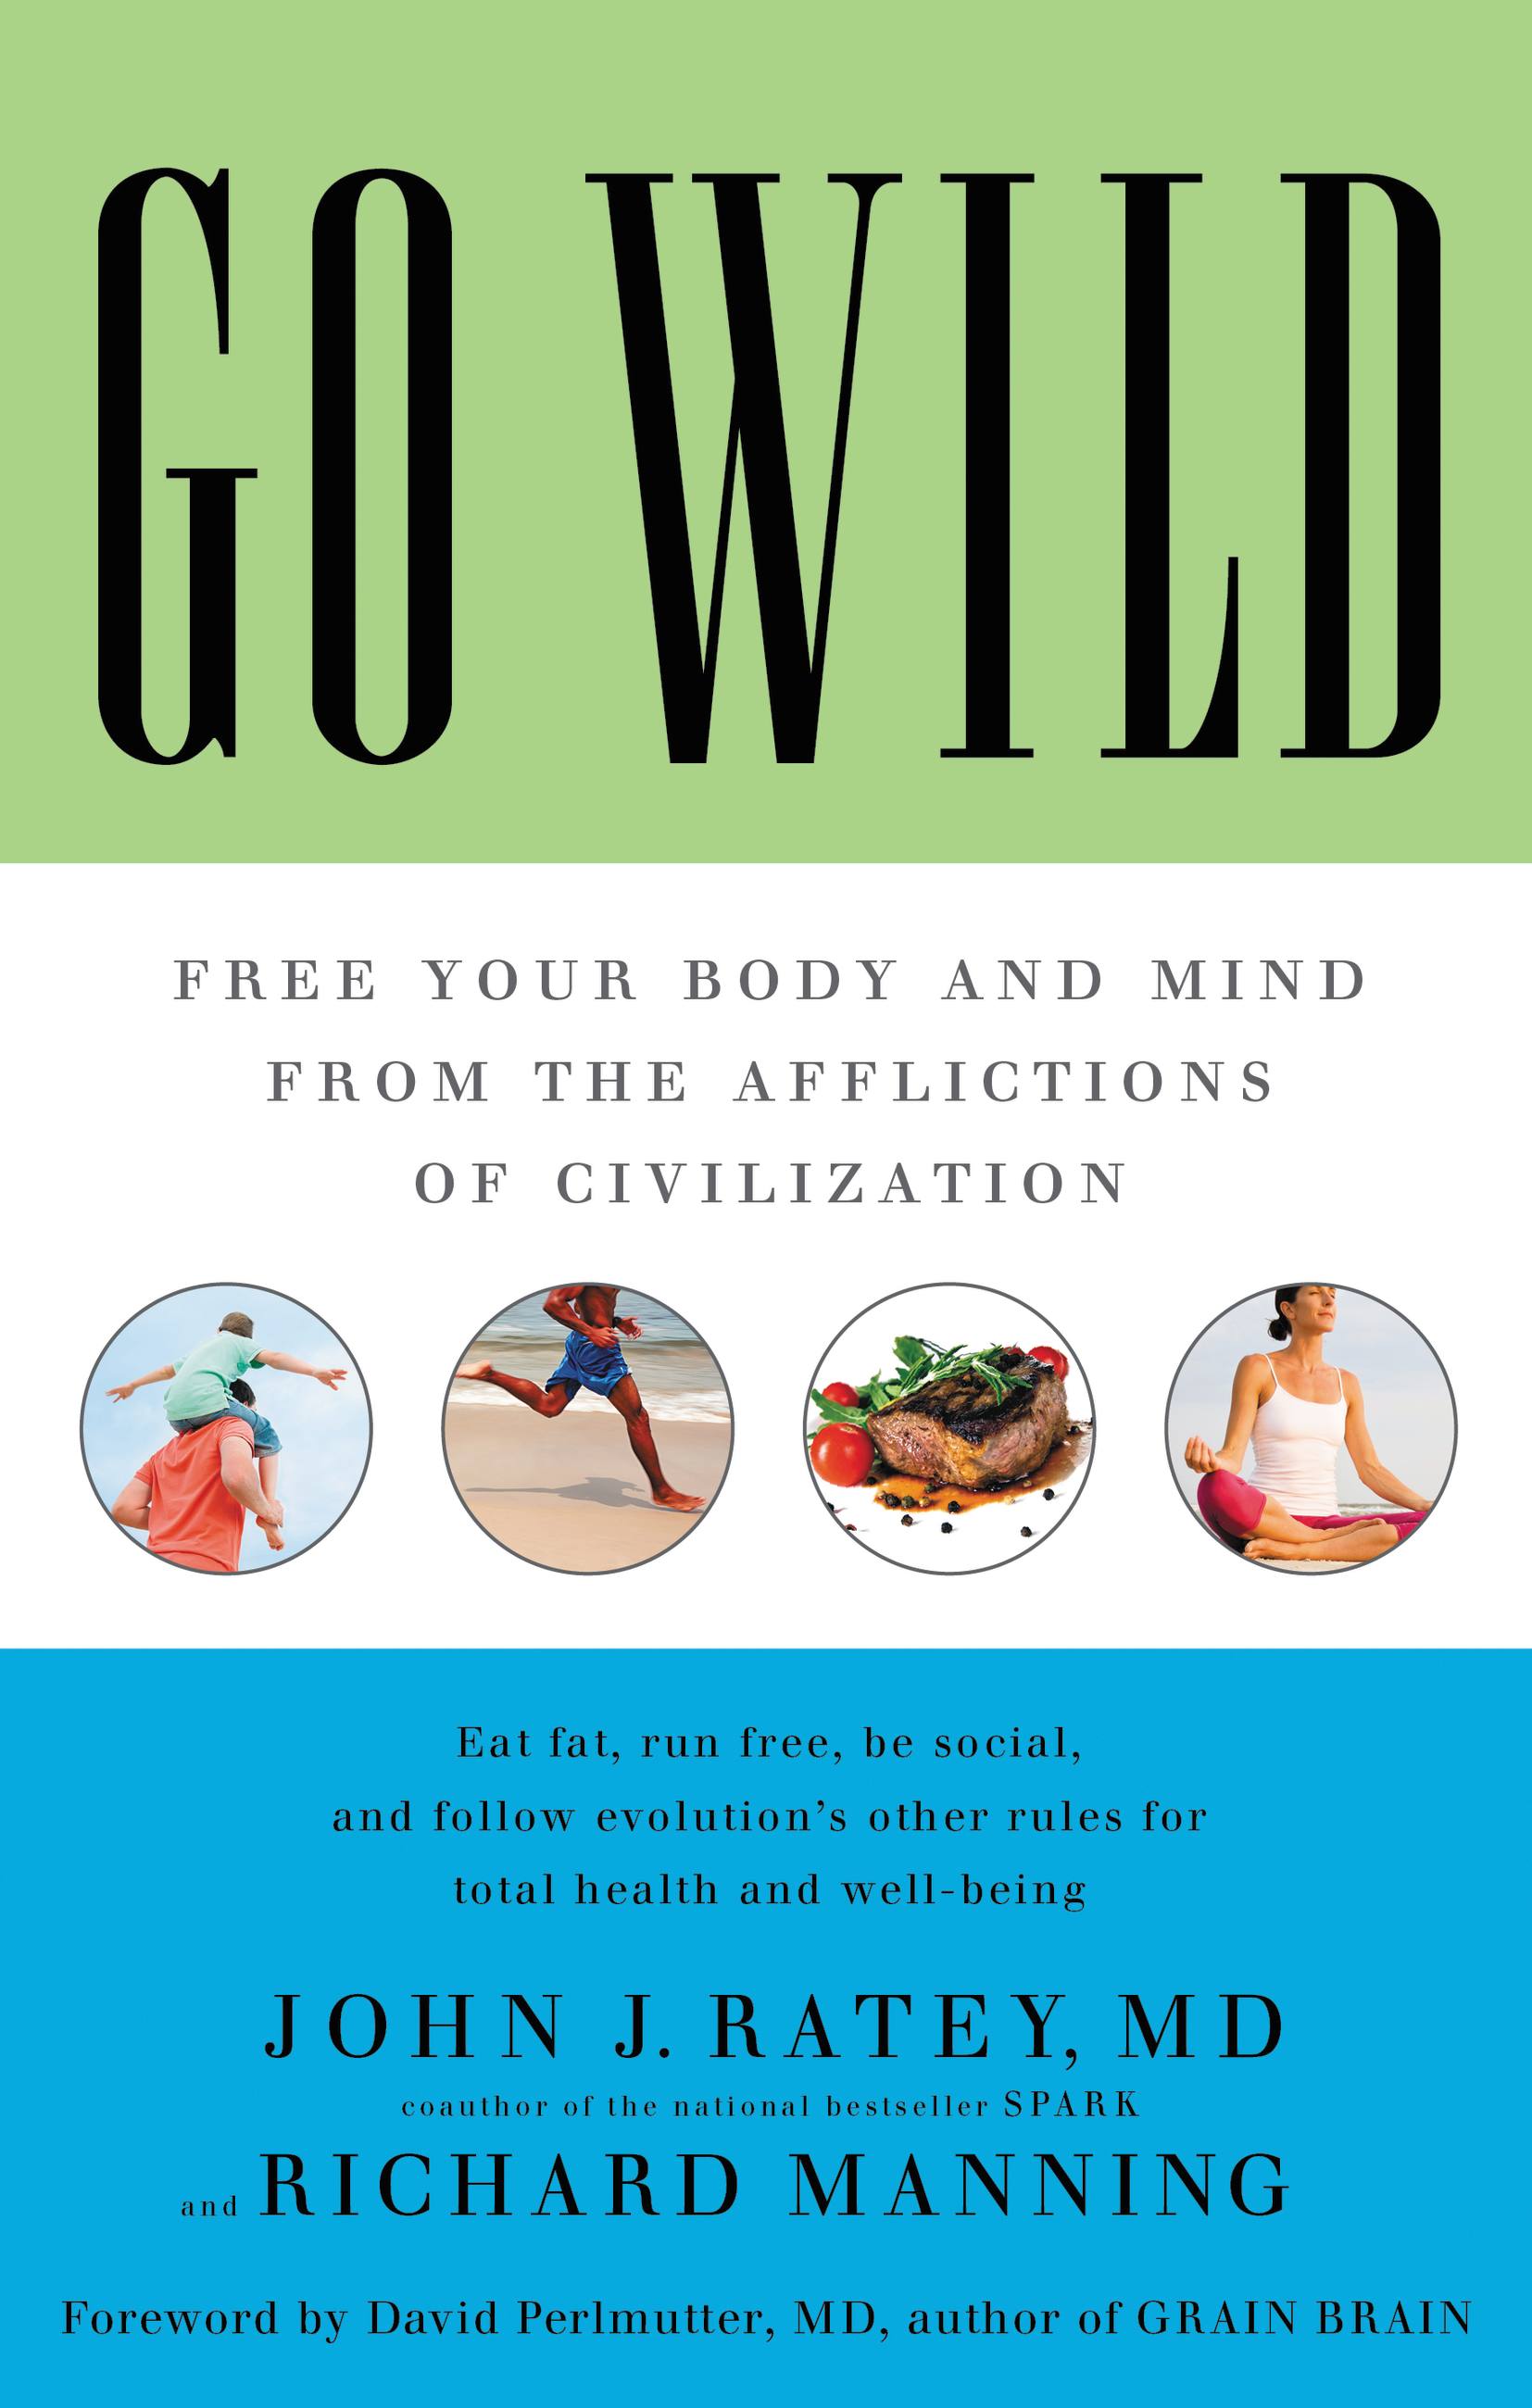 Go Wild : Free Your Body and Mind from the Afflictions of Civilization (Hardcover) - image 1 of 2